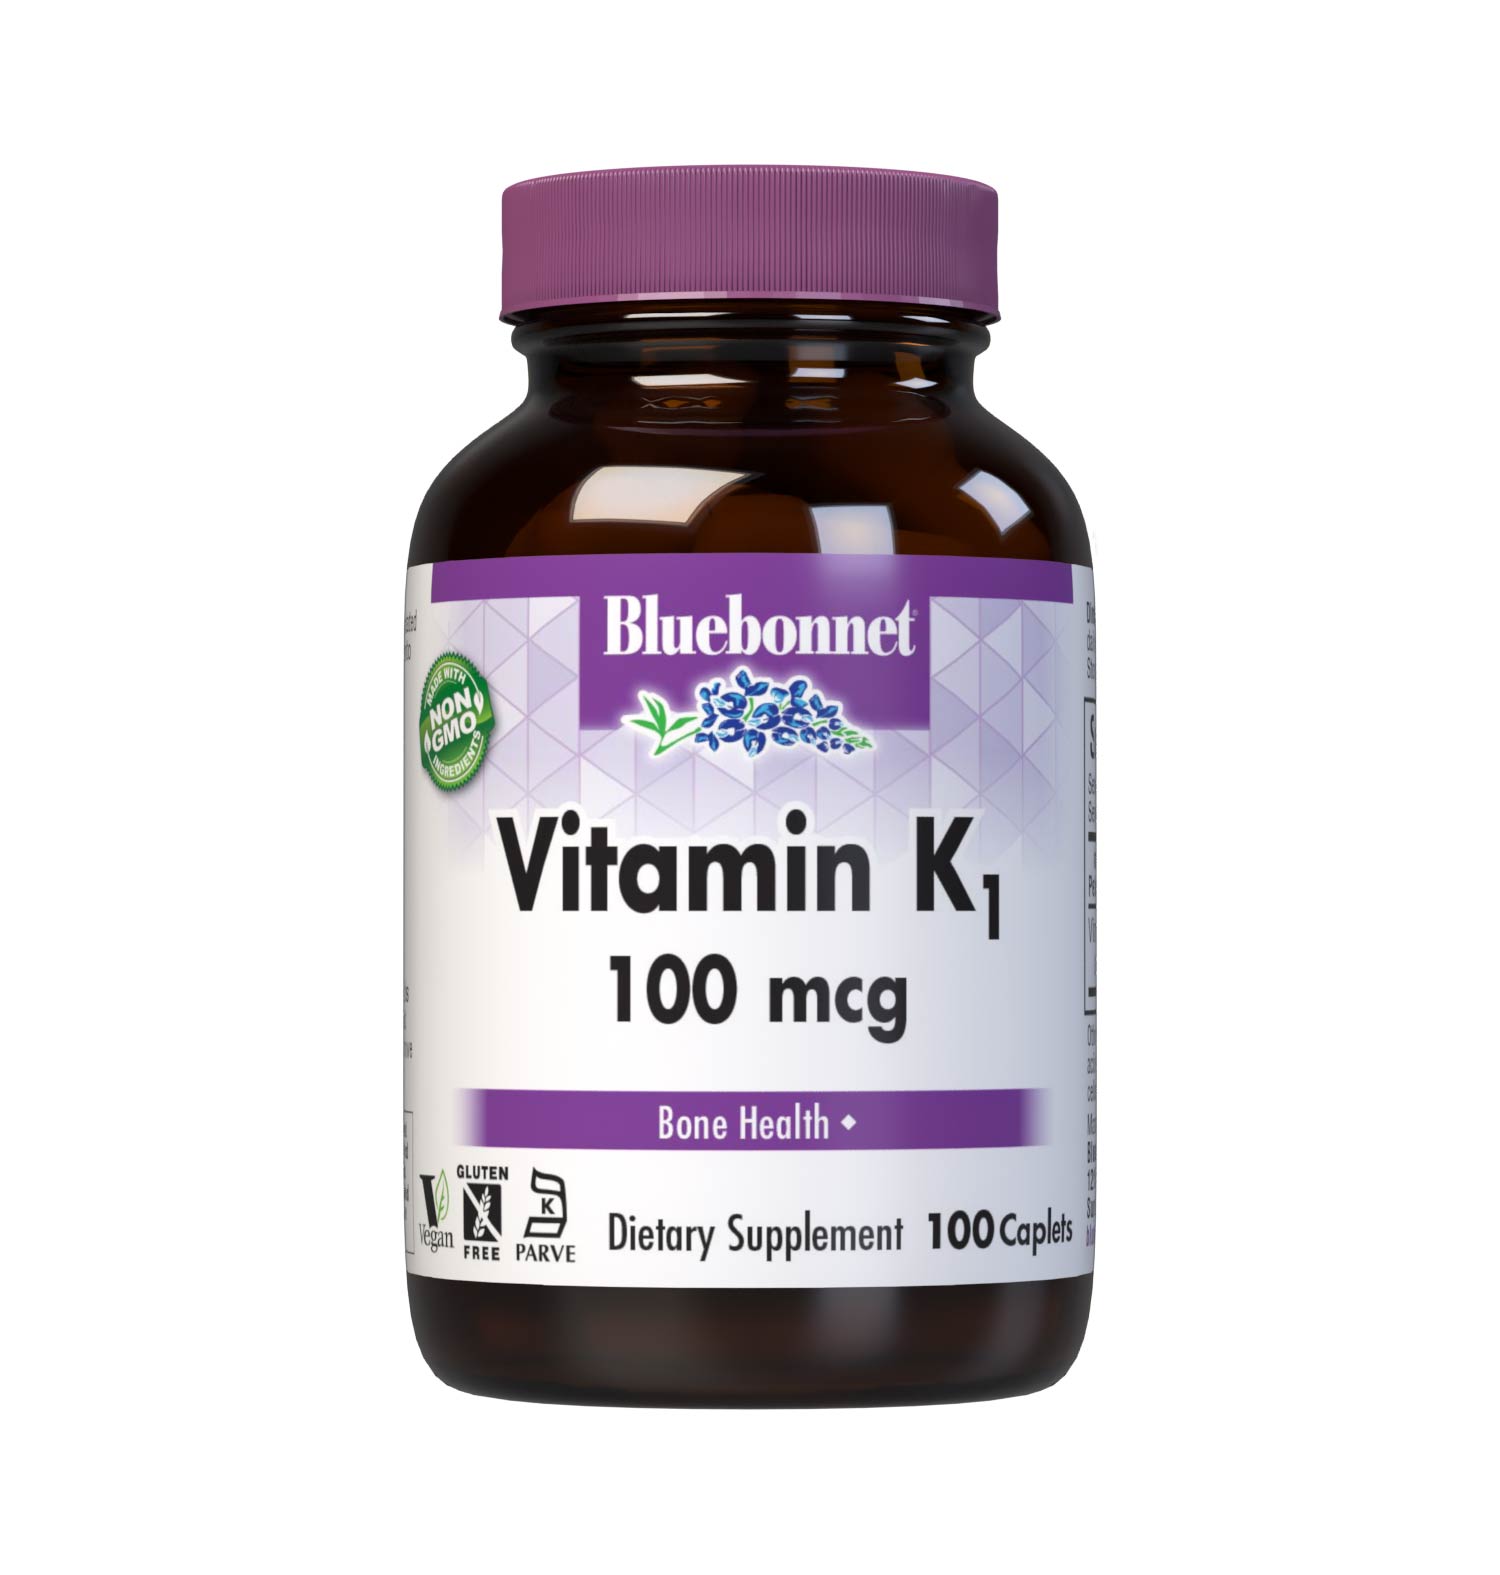 Bluebonnet’s Vitamin K1 100 mcg 100 Caplets are formulated with vitamin K1 (phytonadione) in its crystalline form to help support bone health. #size_100 count